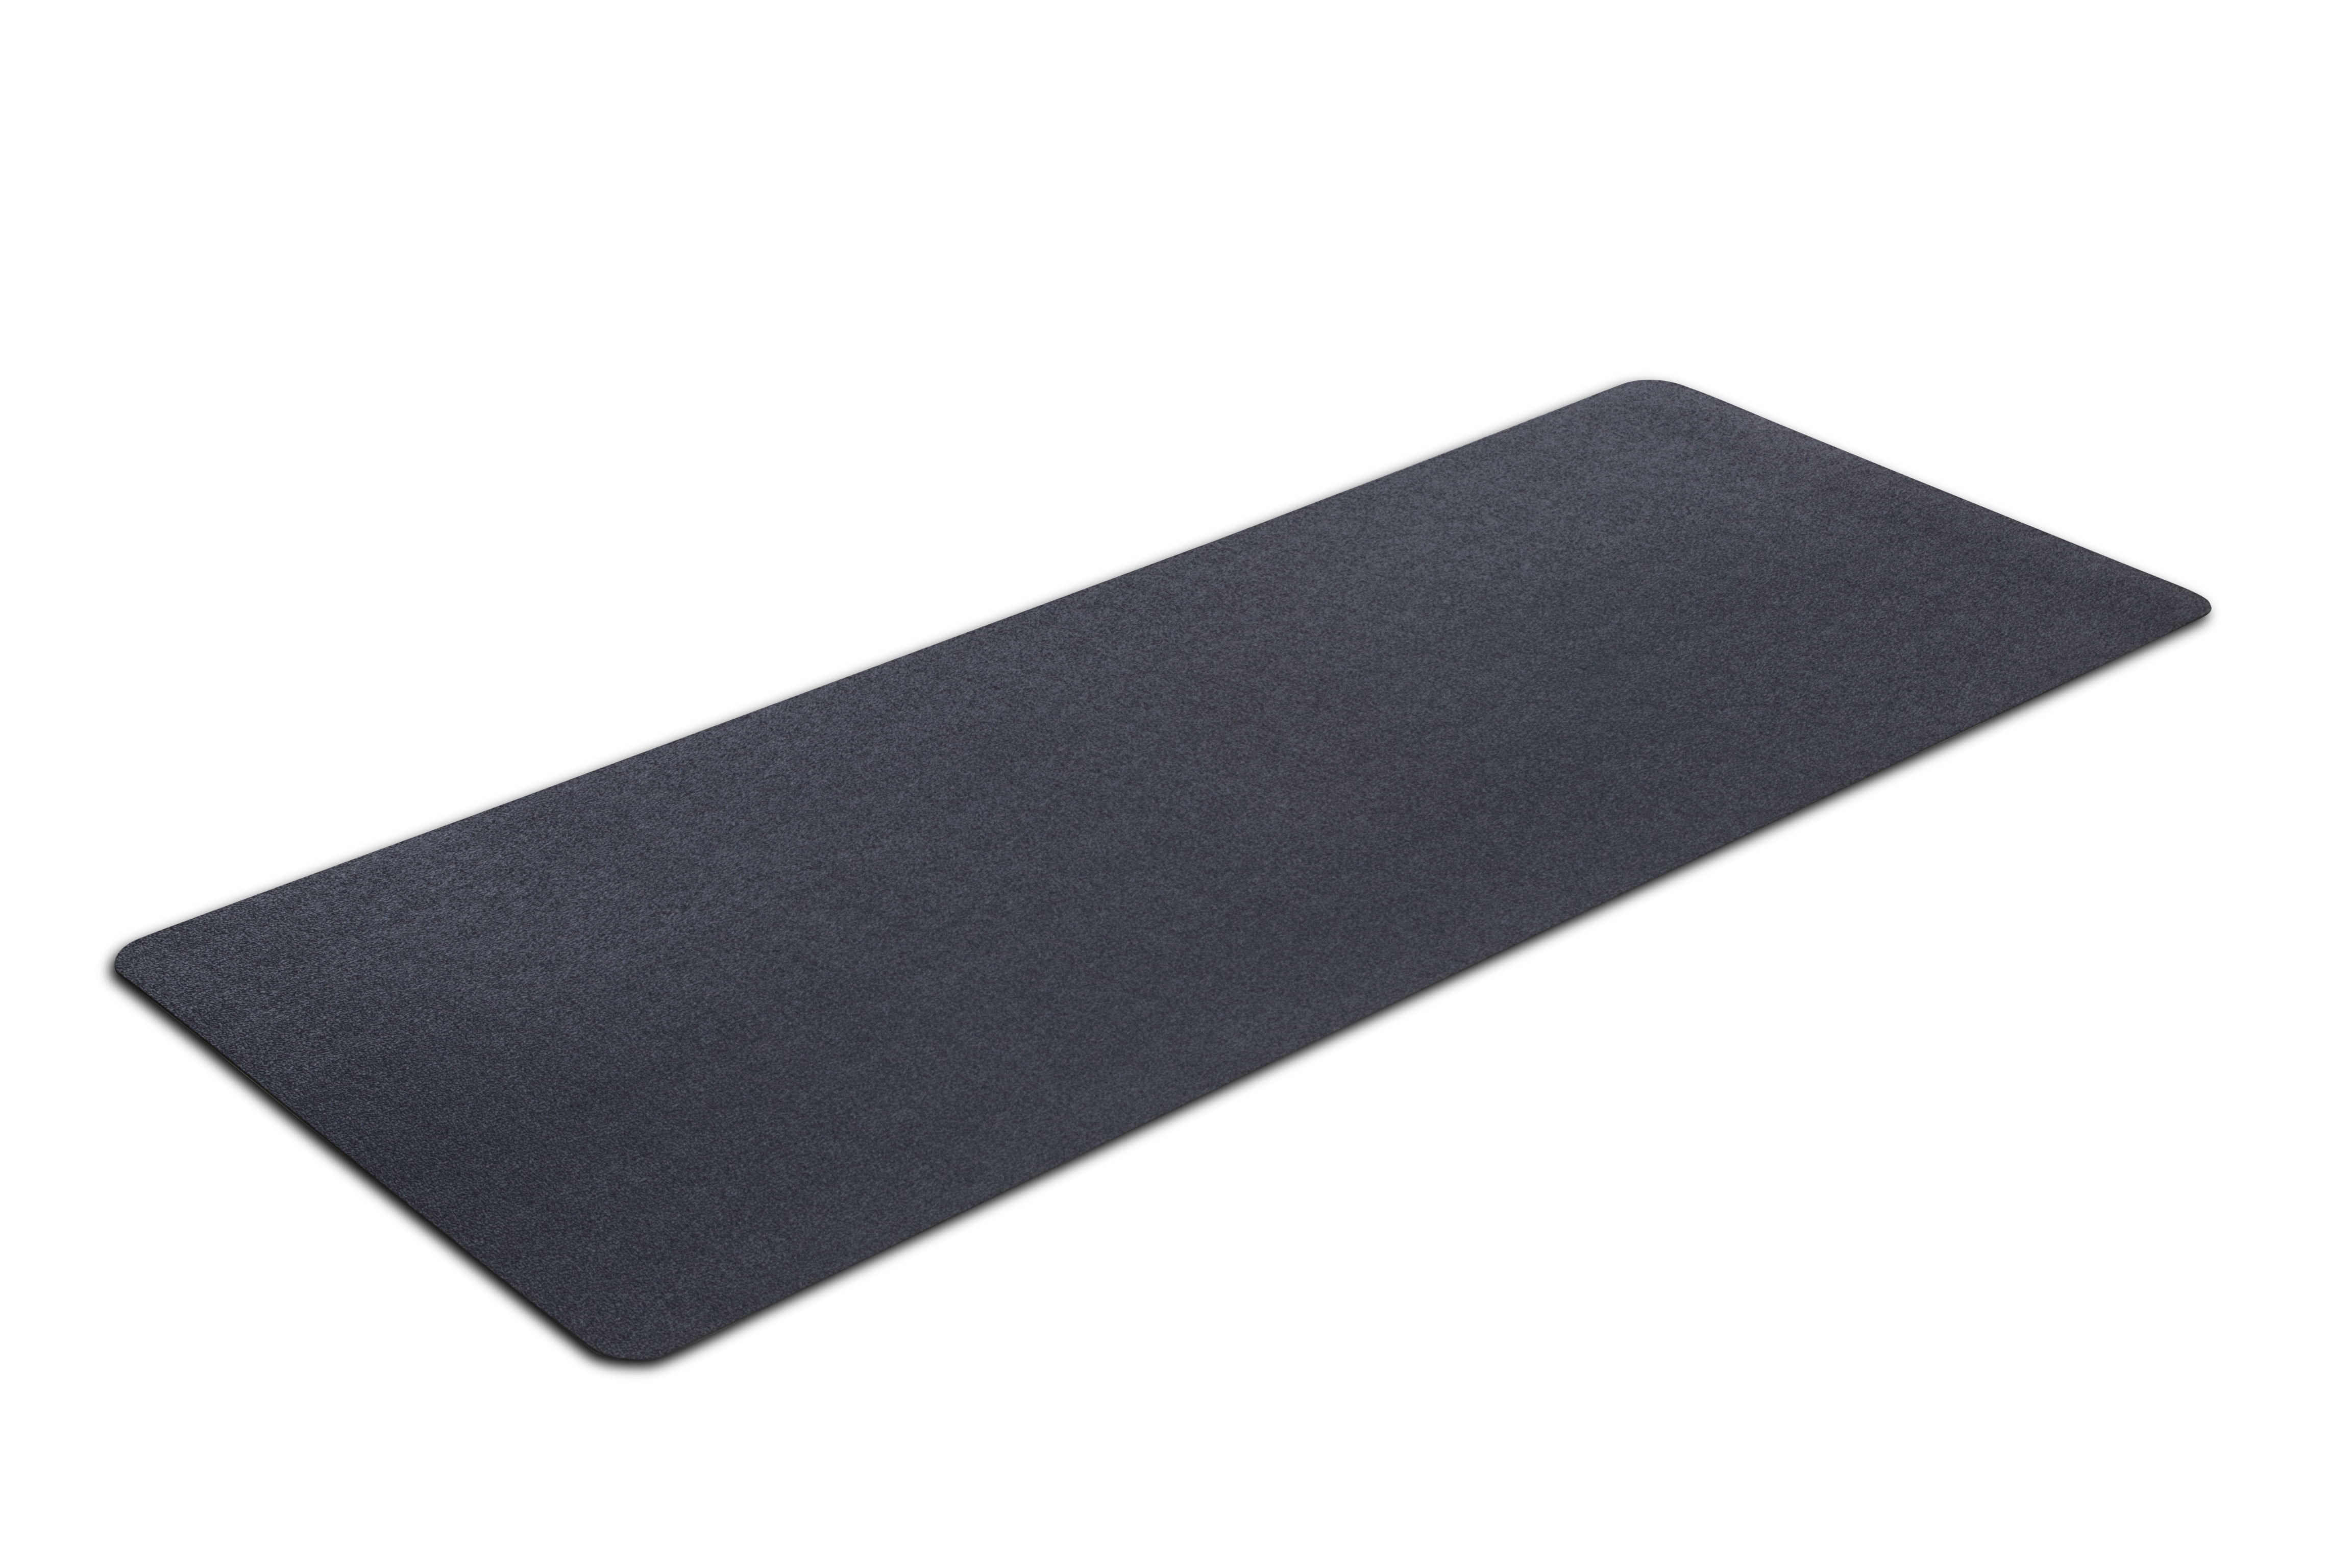 Stationary Bike Rowing x MotionTex Exercise Equipment Mat for Under Treadmill 